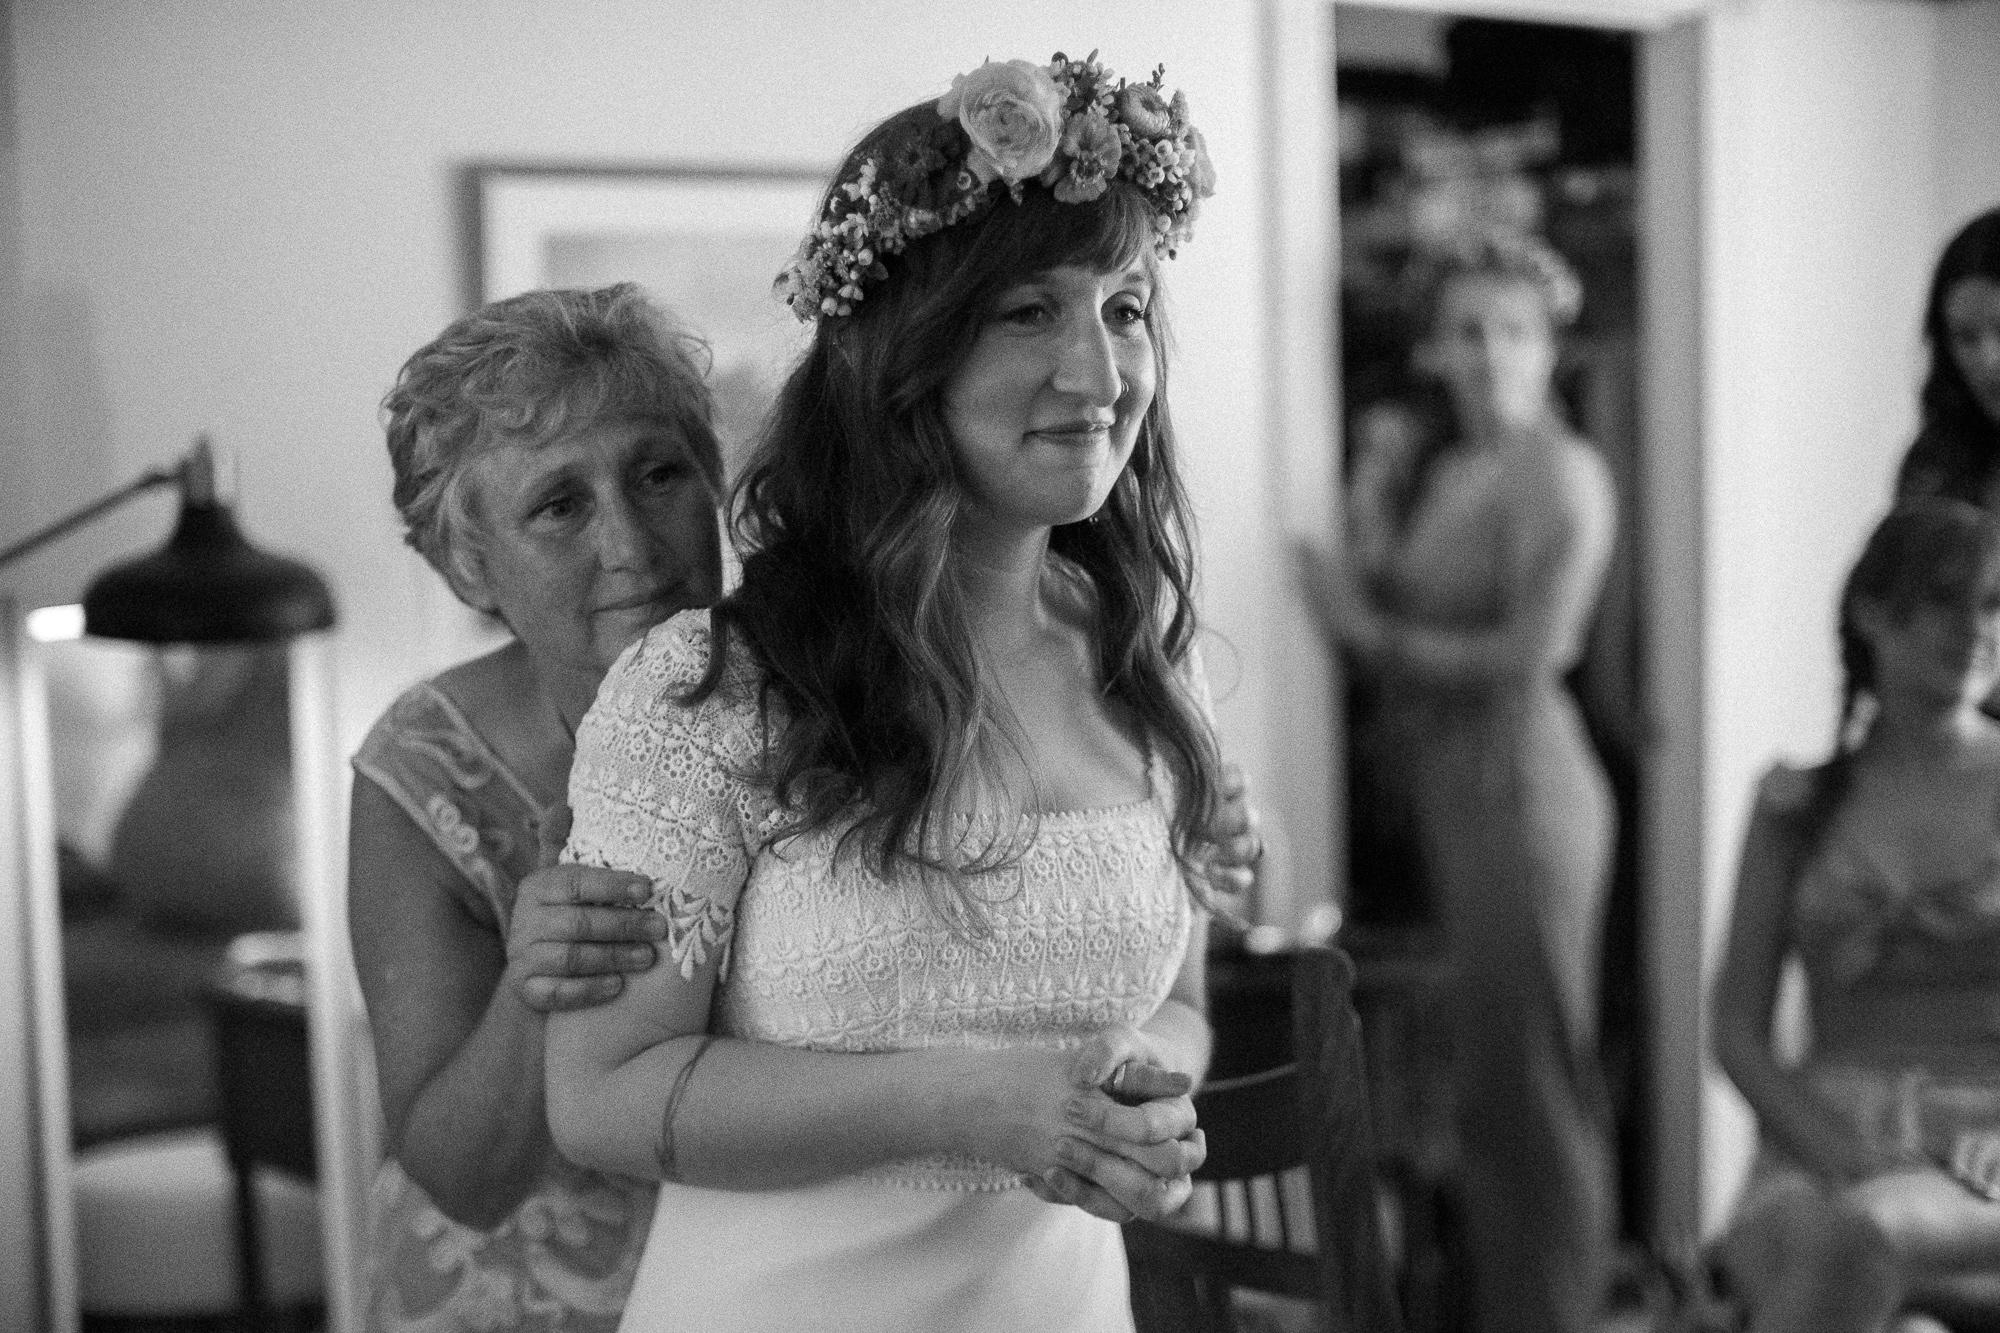 mother and bride intimate moment getting ready for wedding - captured by Virginia documentary wedding photographer - fujifilm classic wedding photo